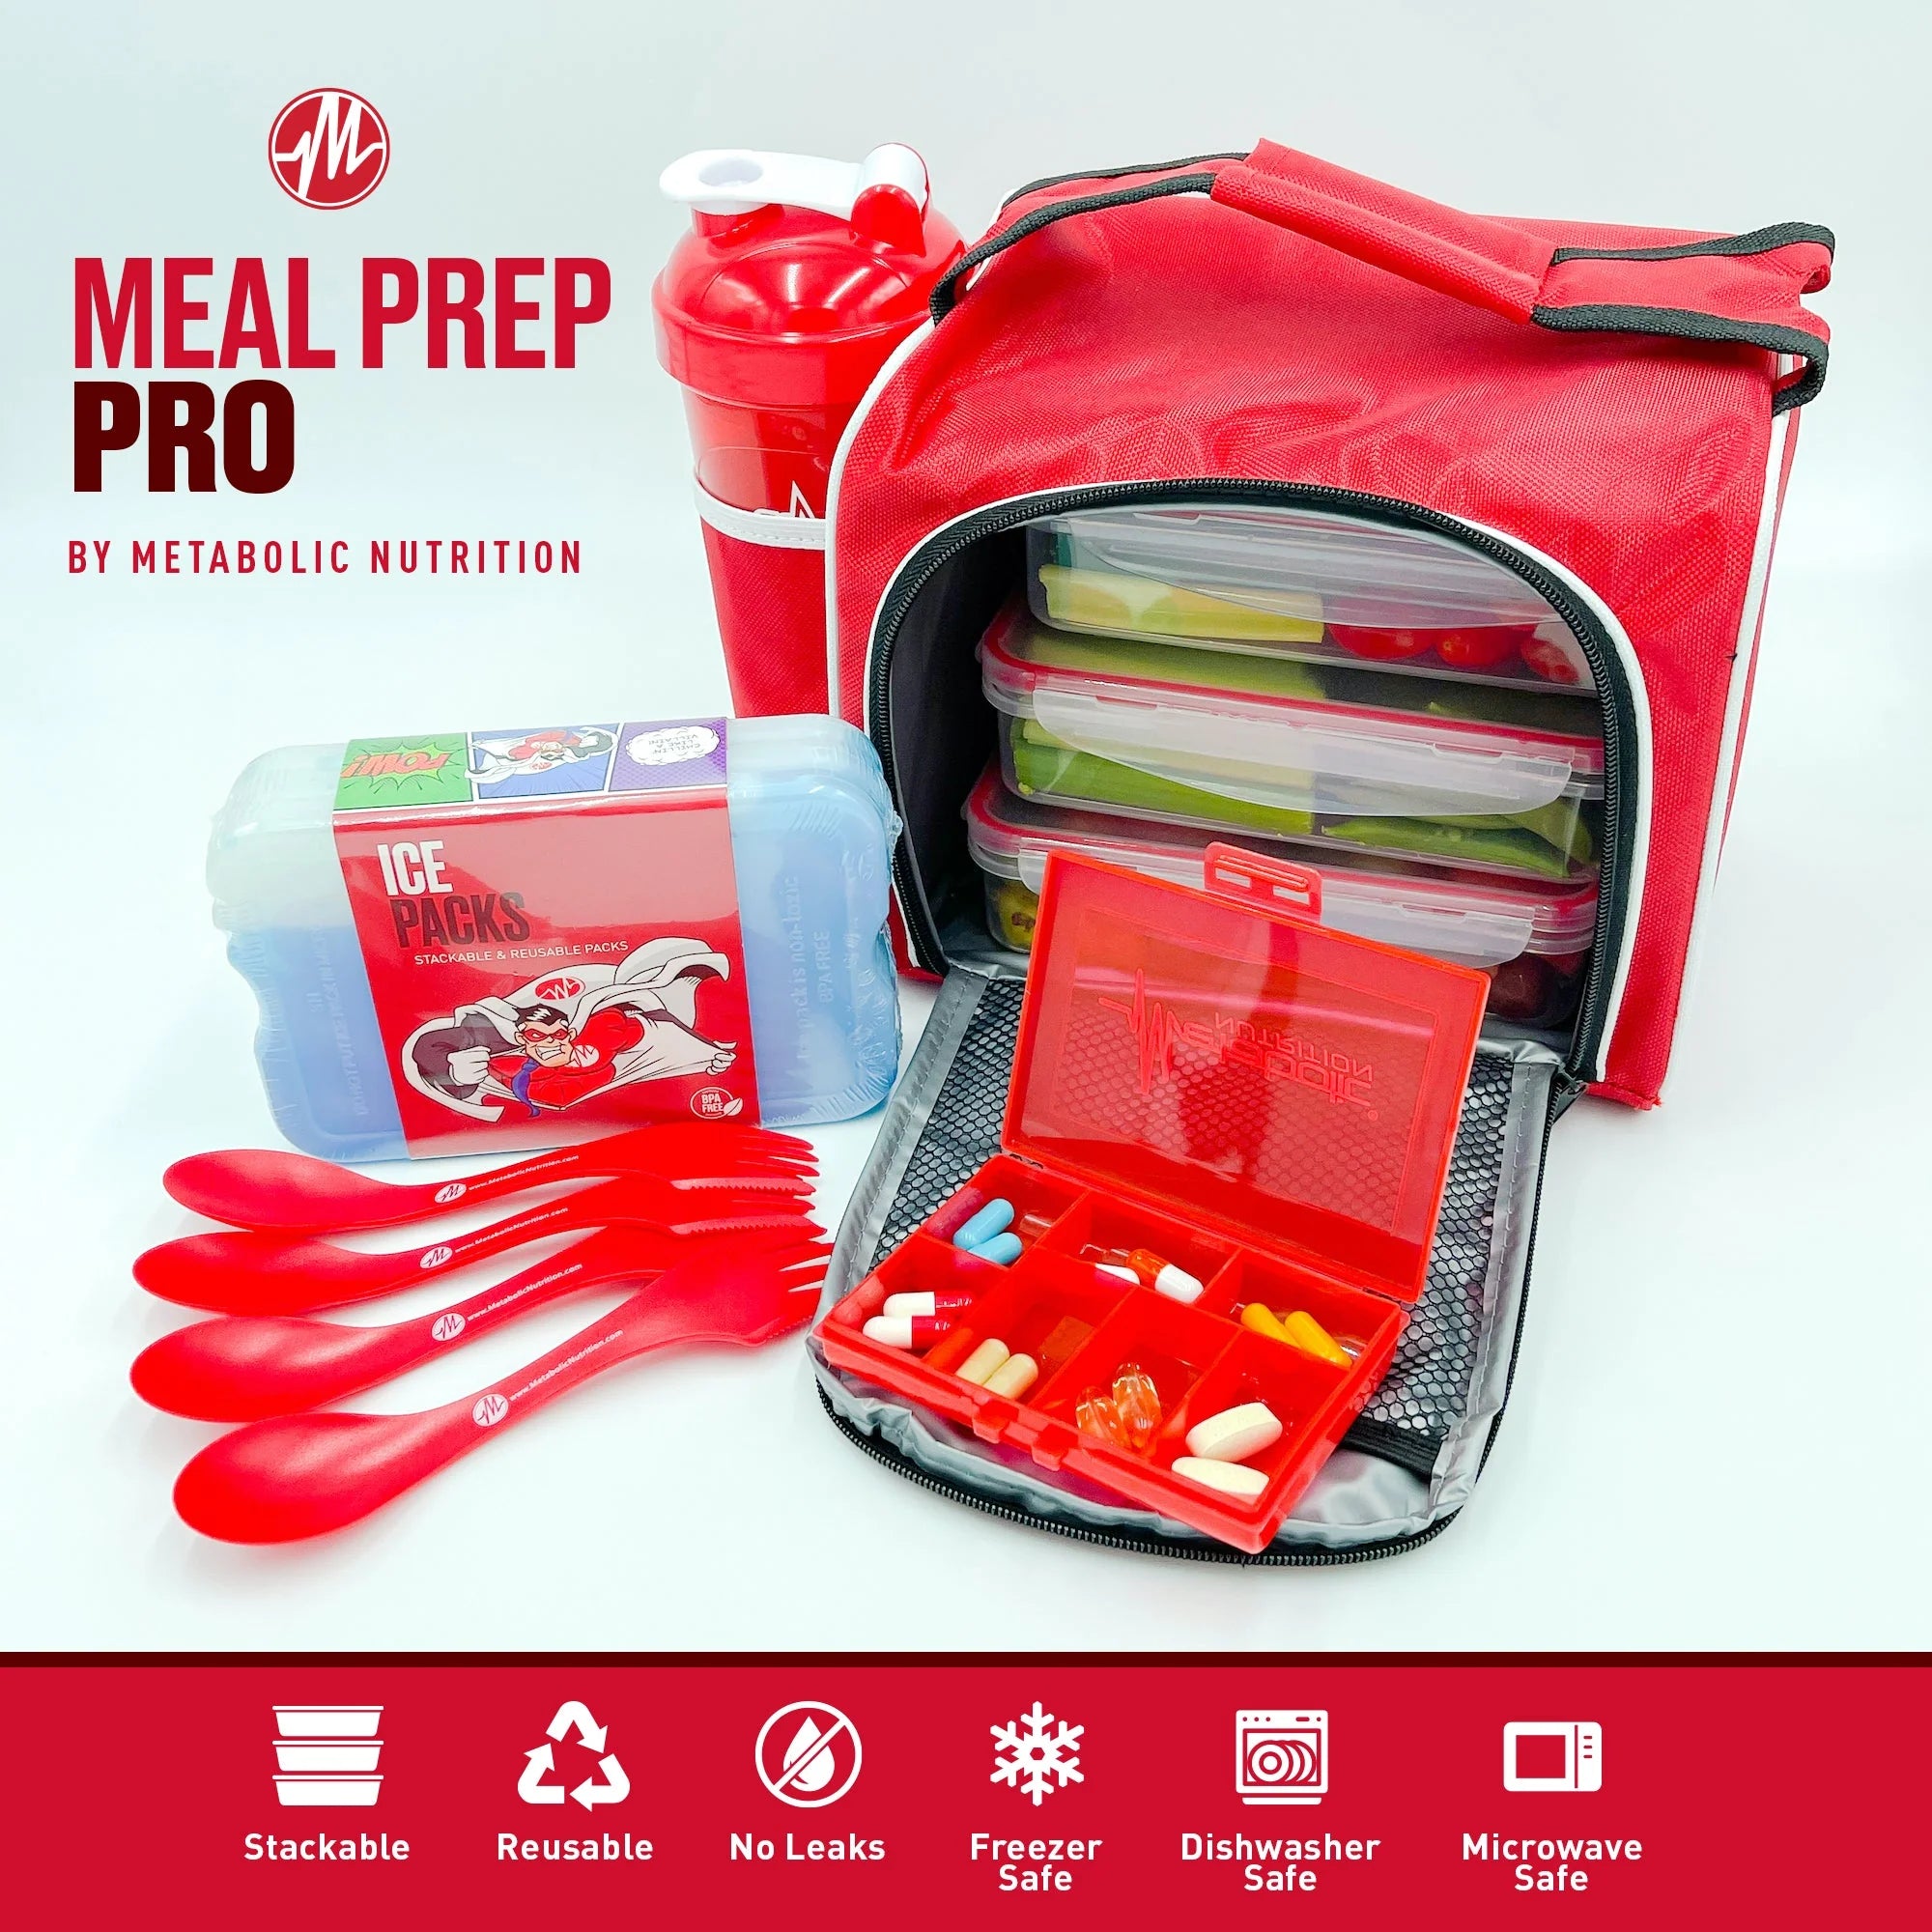 Metabolic Nutrition: Meal Prep Carrier